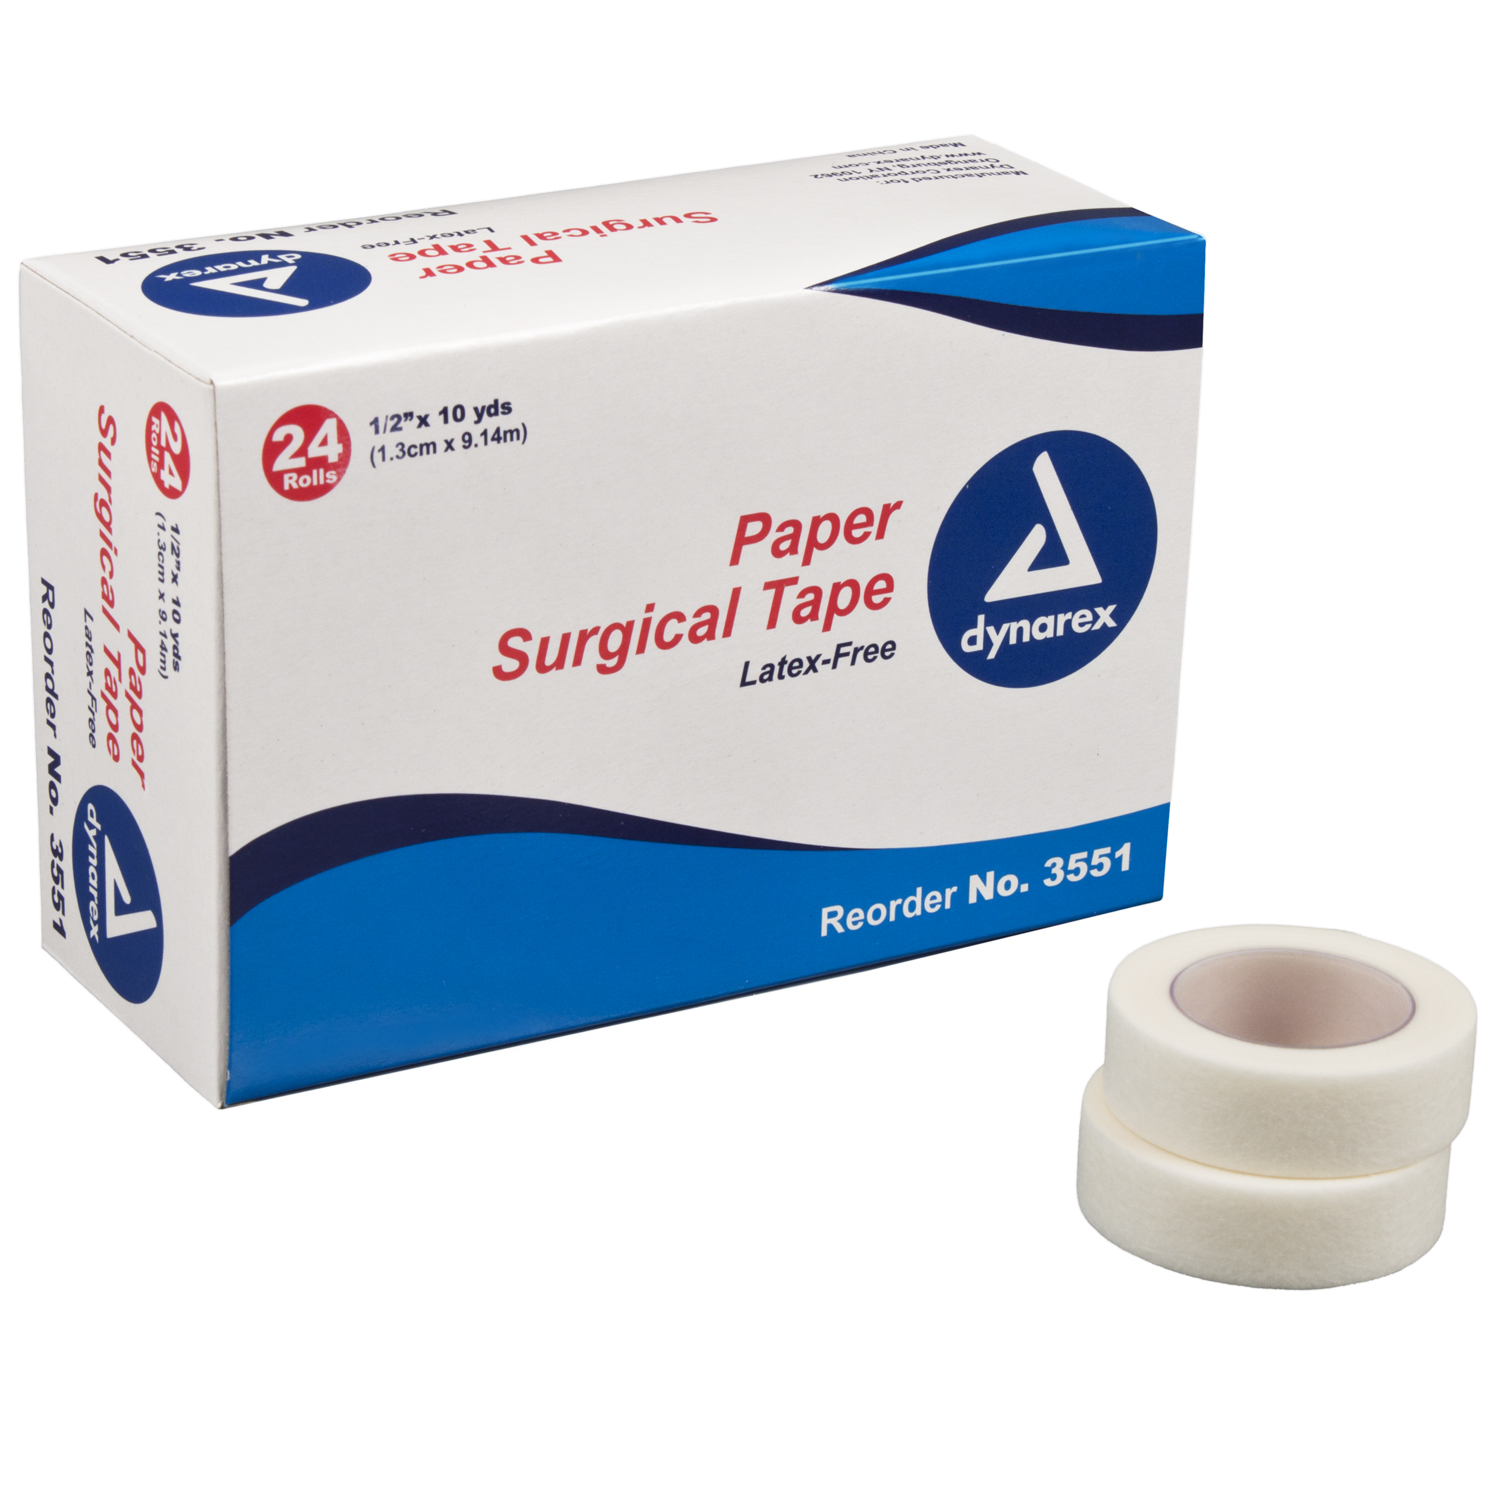 0.5 Inch Paper Surgical Tape: Single Roll image